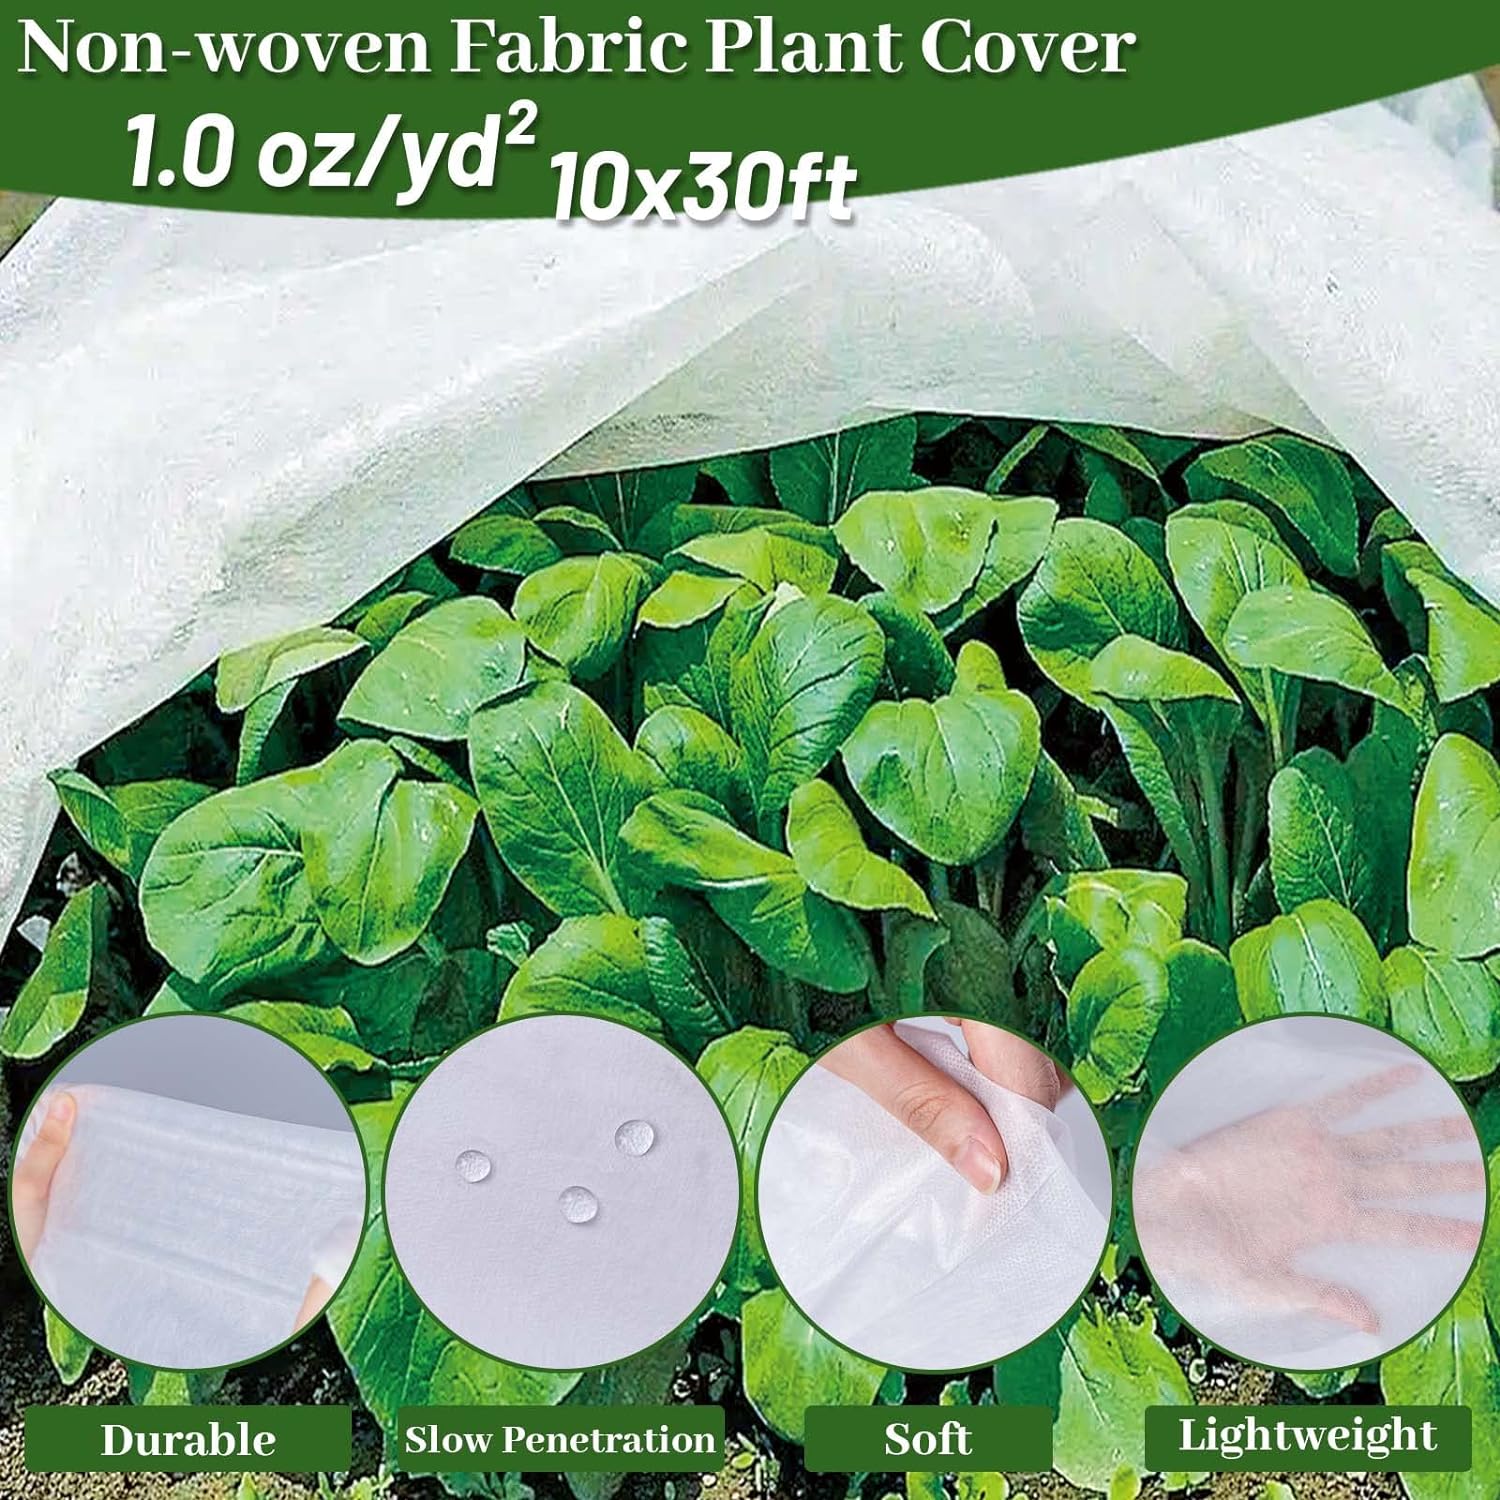 Amazon.com : Cool Area Plant Covers Freeze Protection 10x30 ft 1.0oz Resuable Frost Cloth Blanket Floating Row Cover Garden Fabric for Winter Outdoor Vegetables Plants Against Pest Insects : Patio, Lawn  Garden